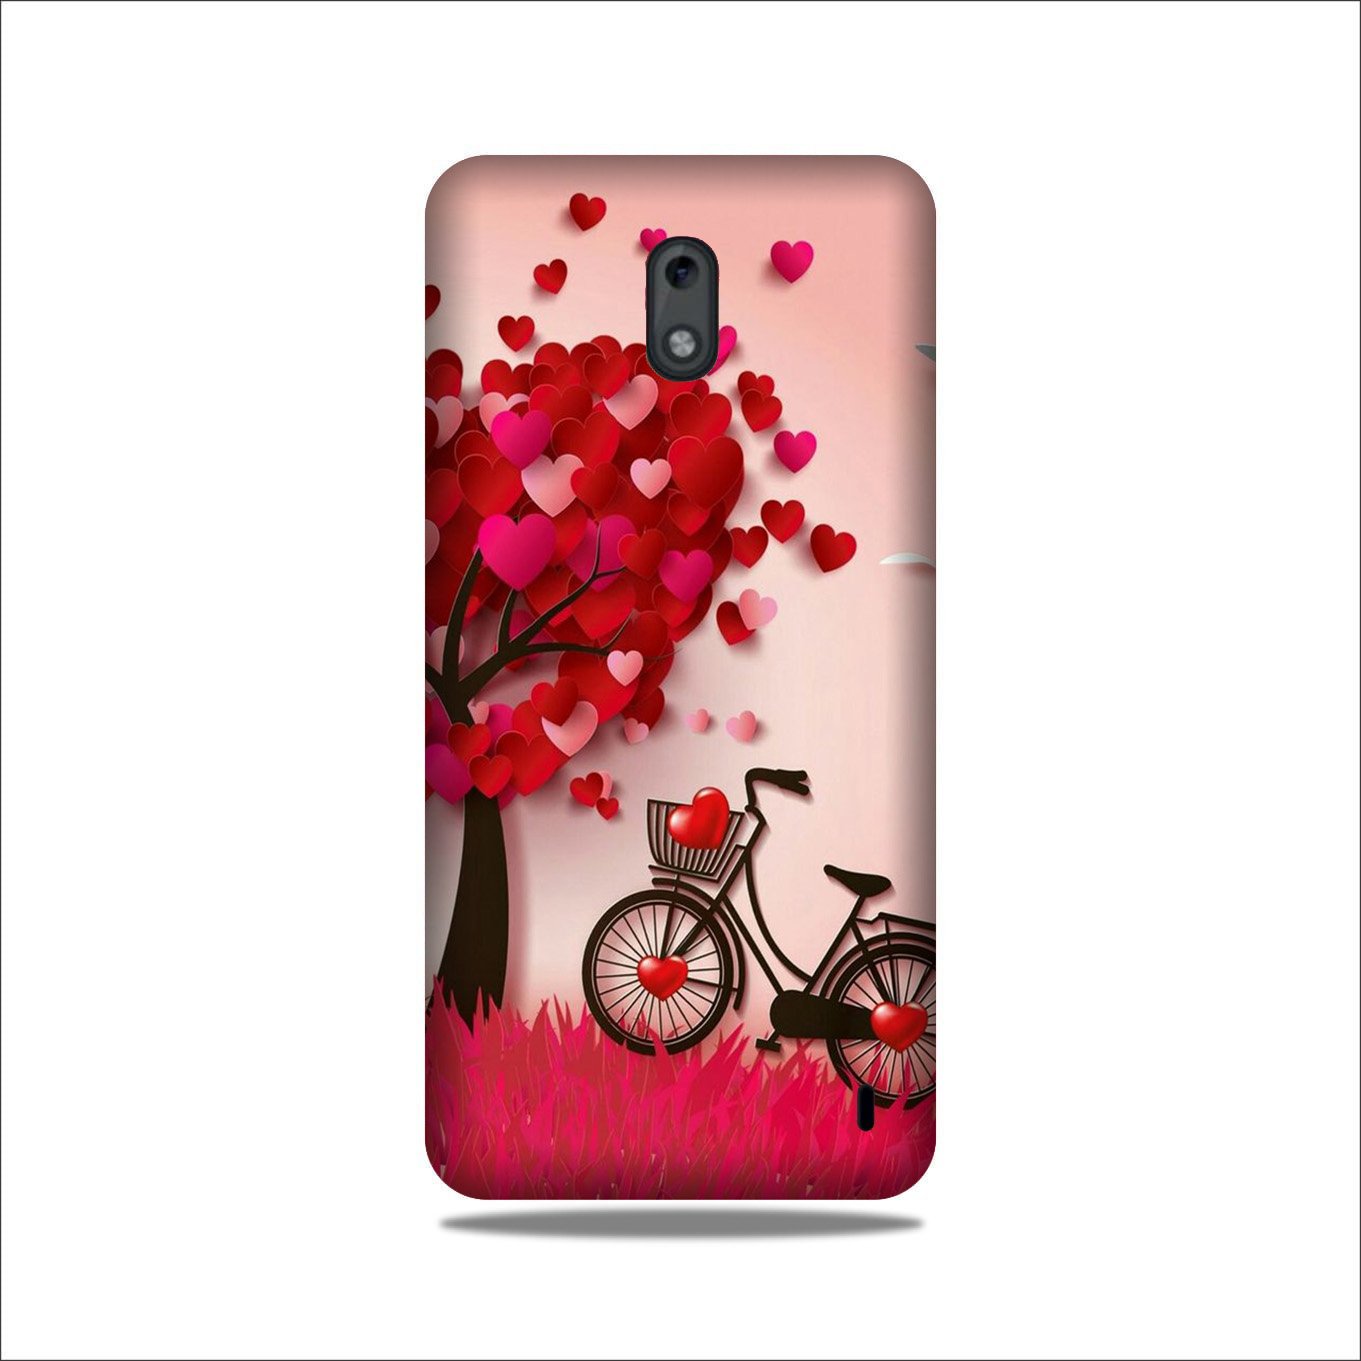 Red Heart Cycle Case for Nokia 2.2 (Design No. 222)